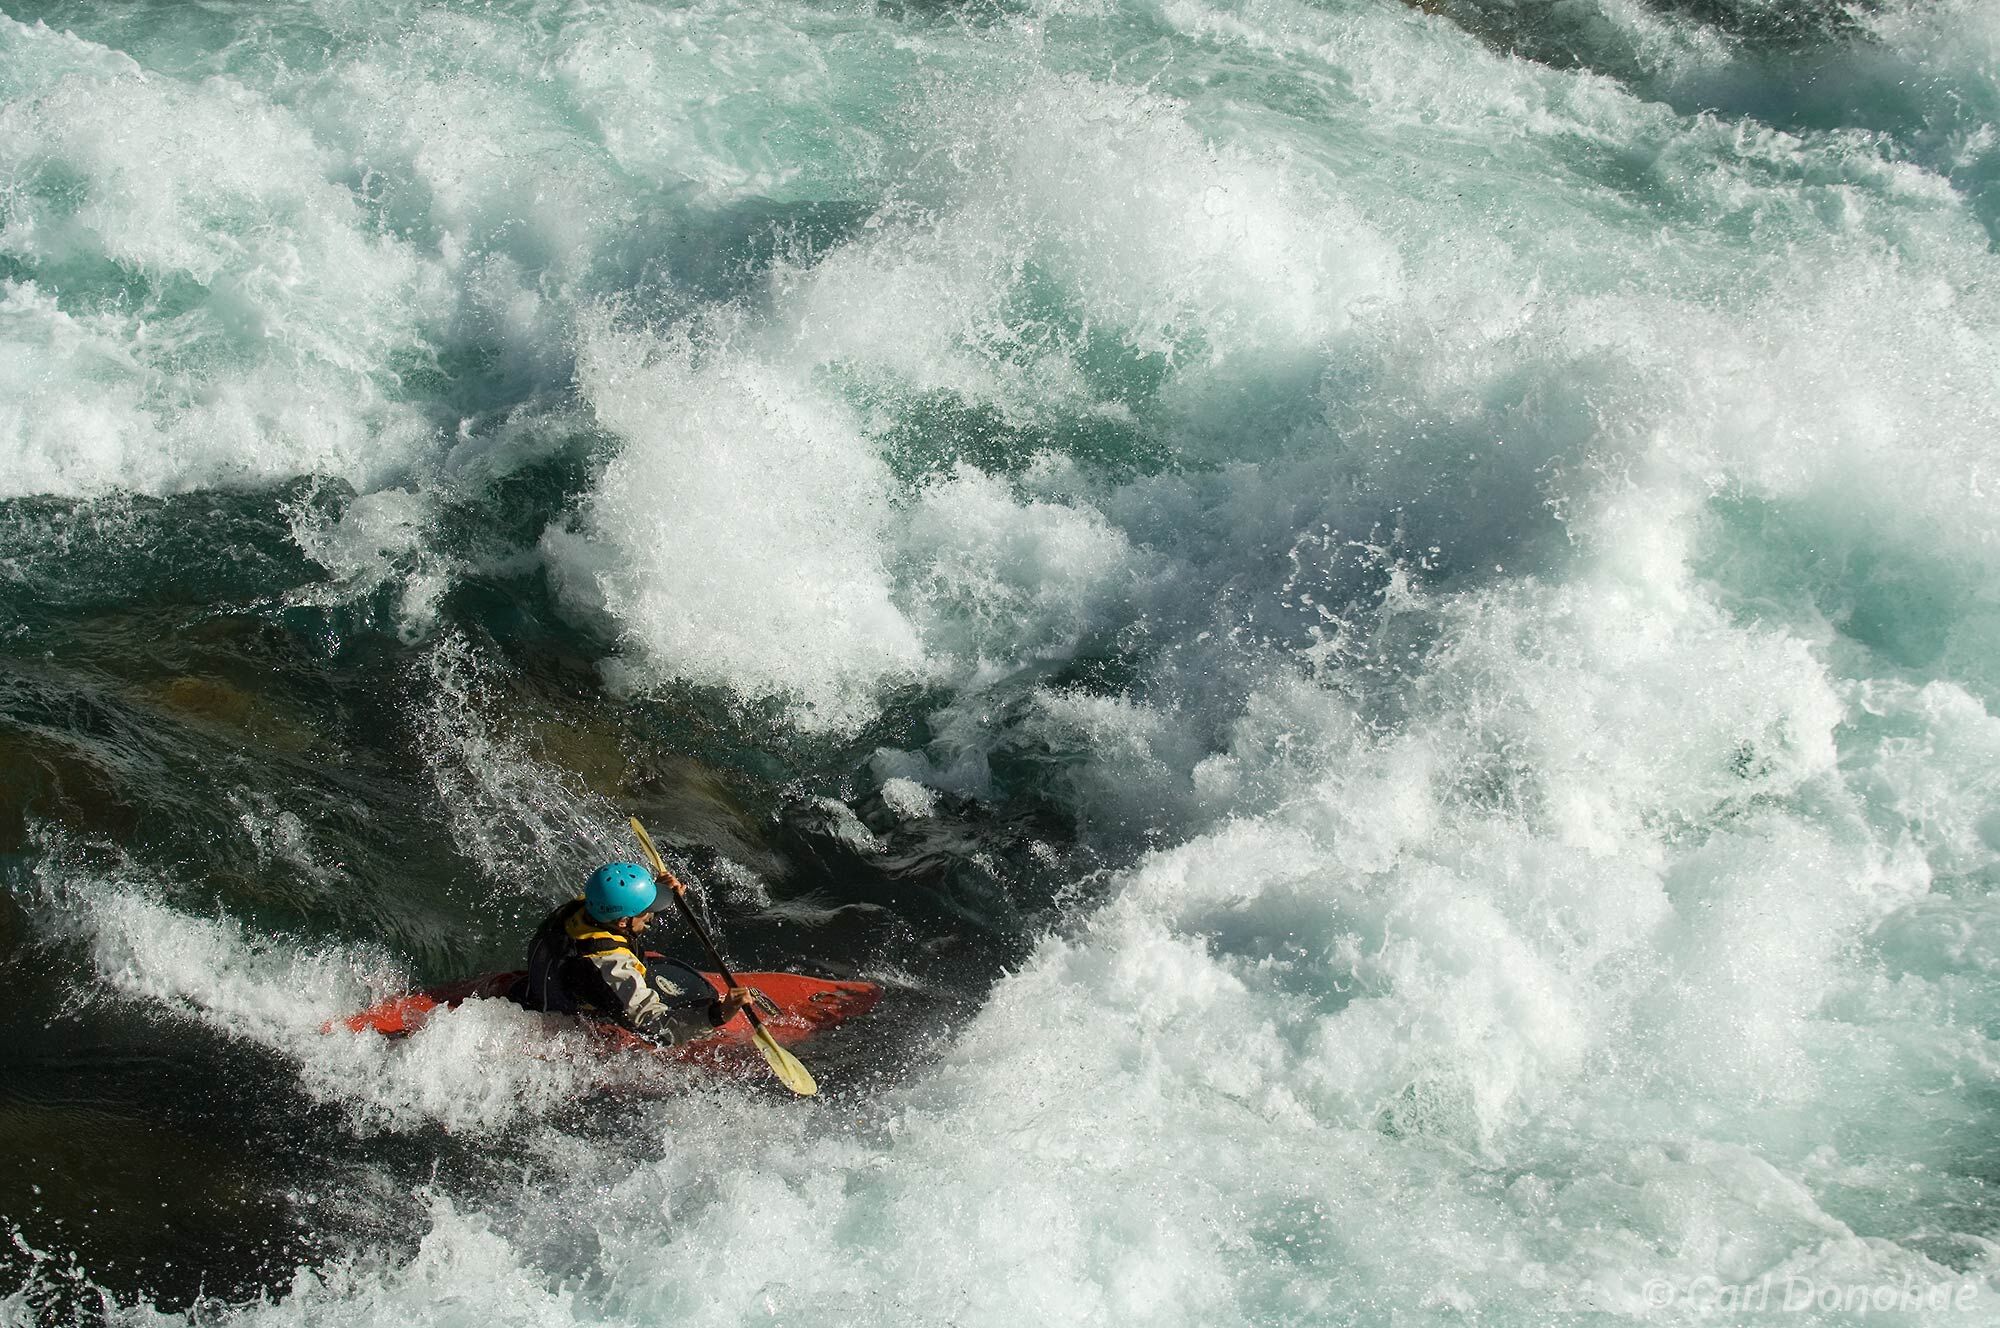 Josh Lowry, reknown whitewater kayaker enters Dynamite, a new Class IV rapid in Hell's Canyon or Infierno Canyon, on the Futaleufu...